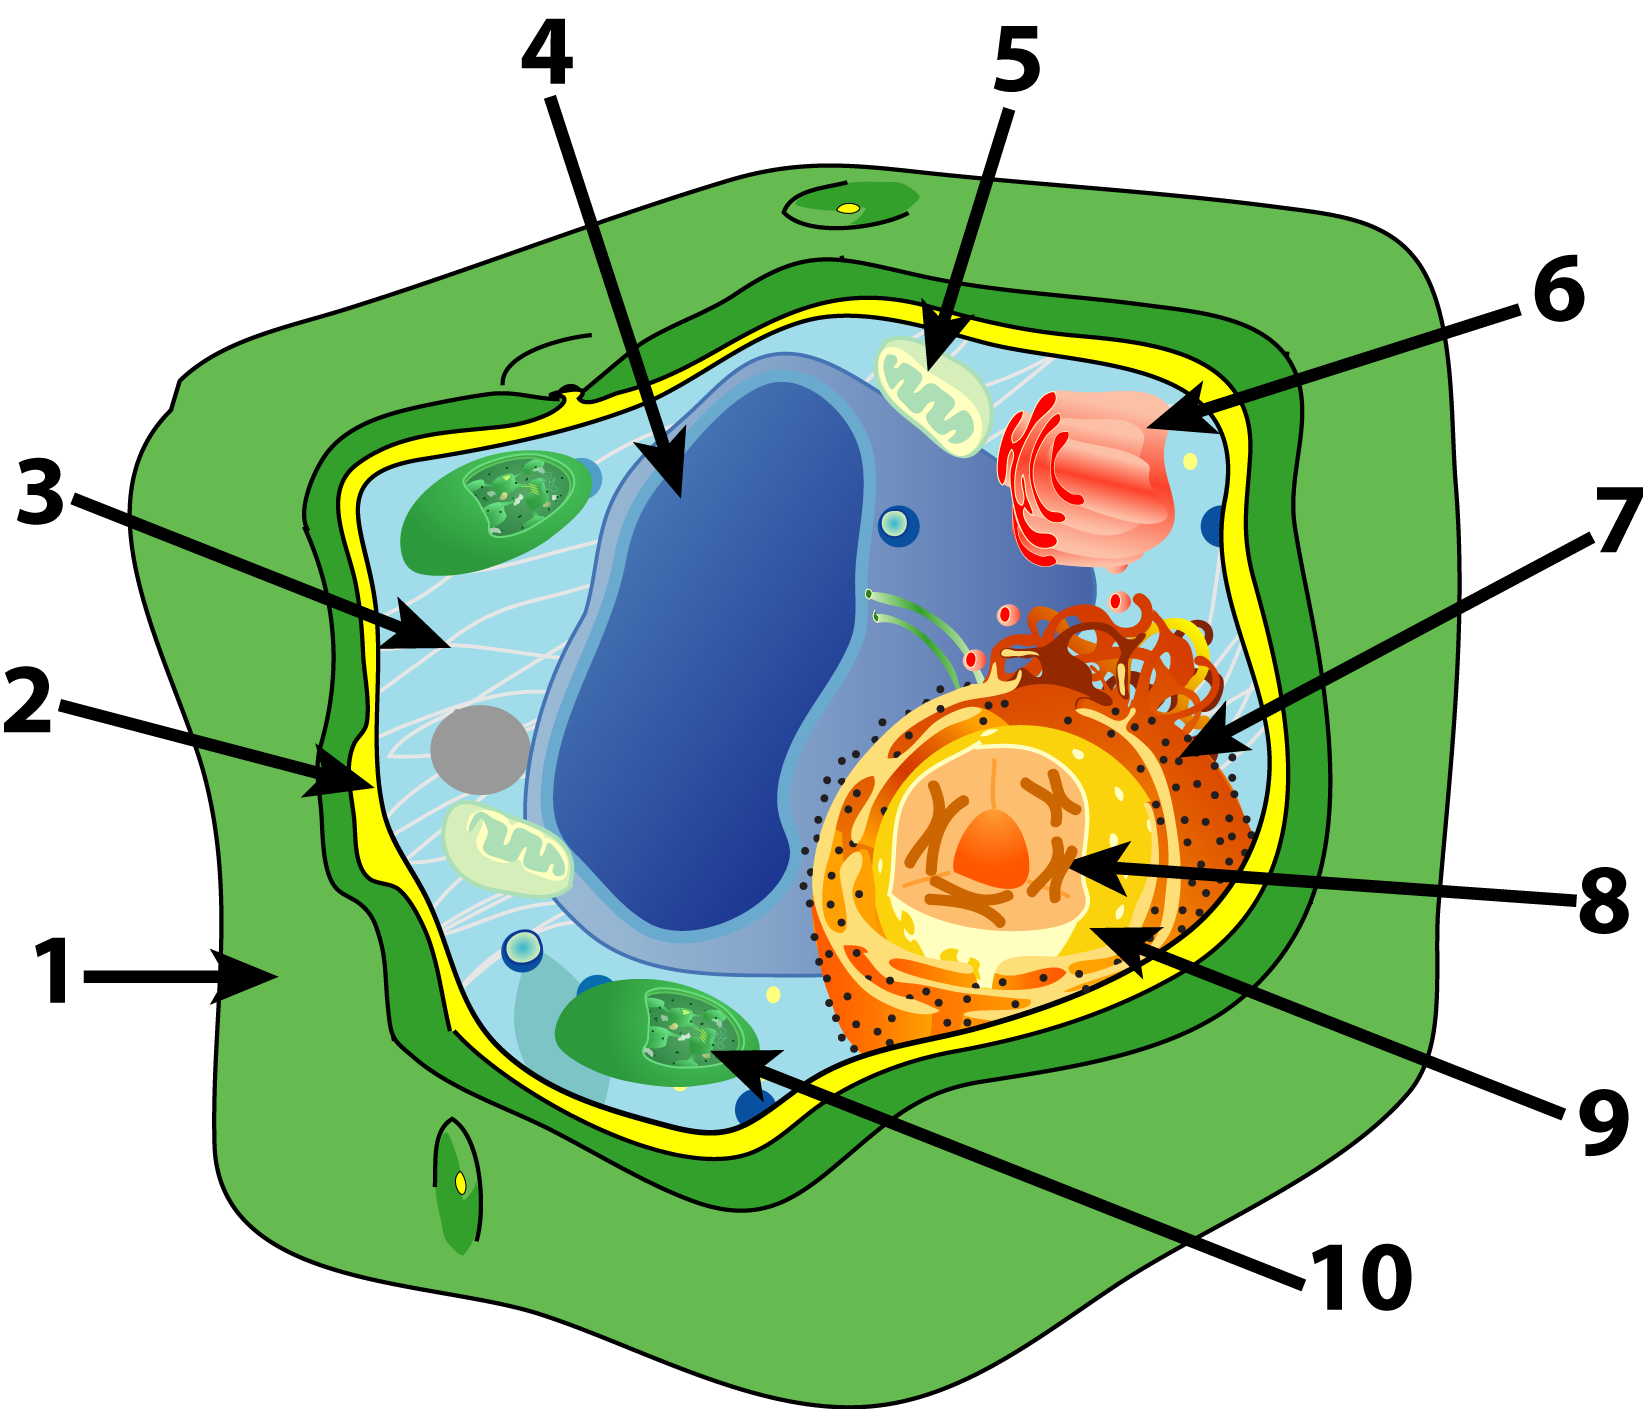 Plant Cell Diagram With Labels Image Of A Plant Cell Diagram With